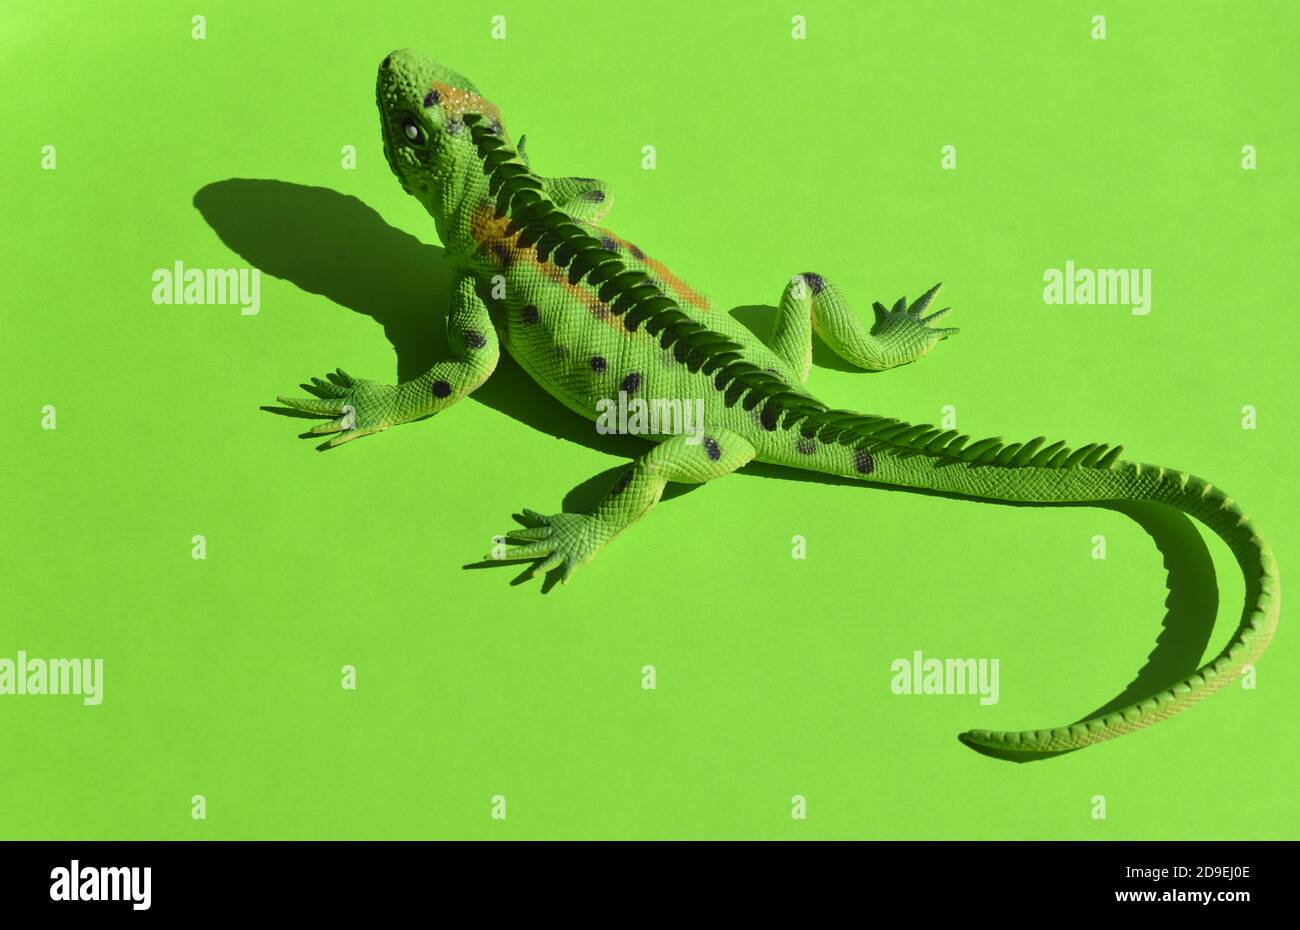 Iguana on a green background. Toys for kids. Play with children. Copy space. Horizontal format. Stock Photo